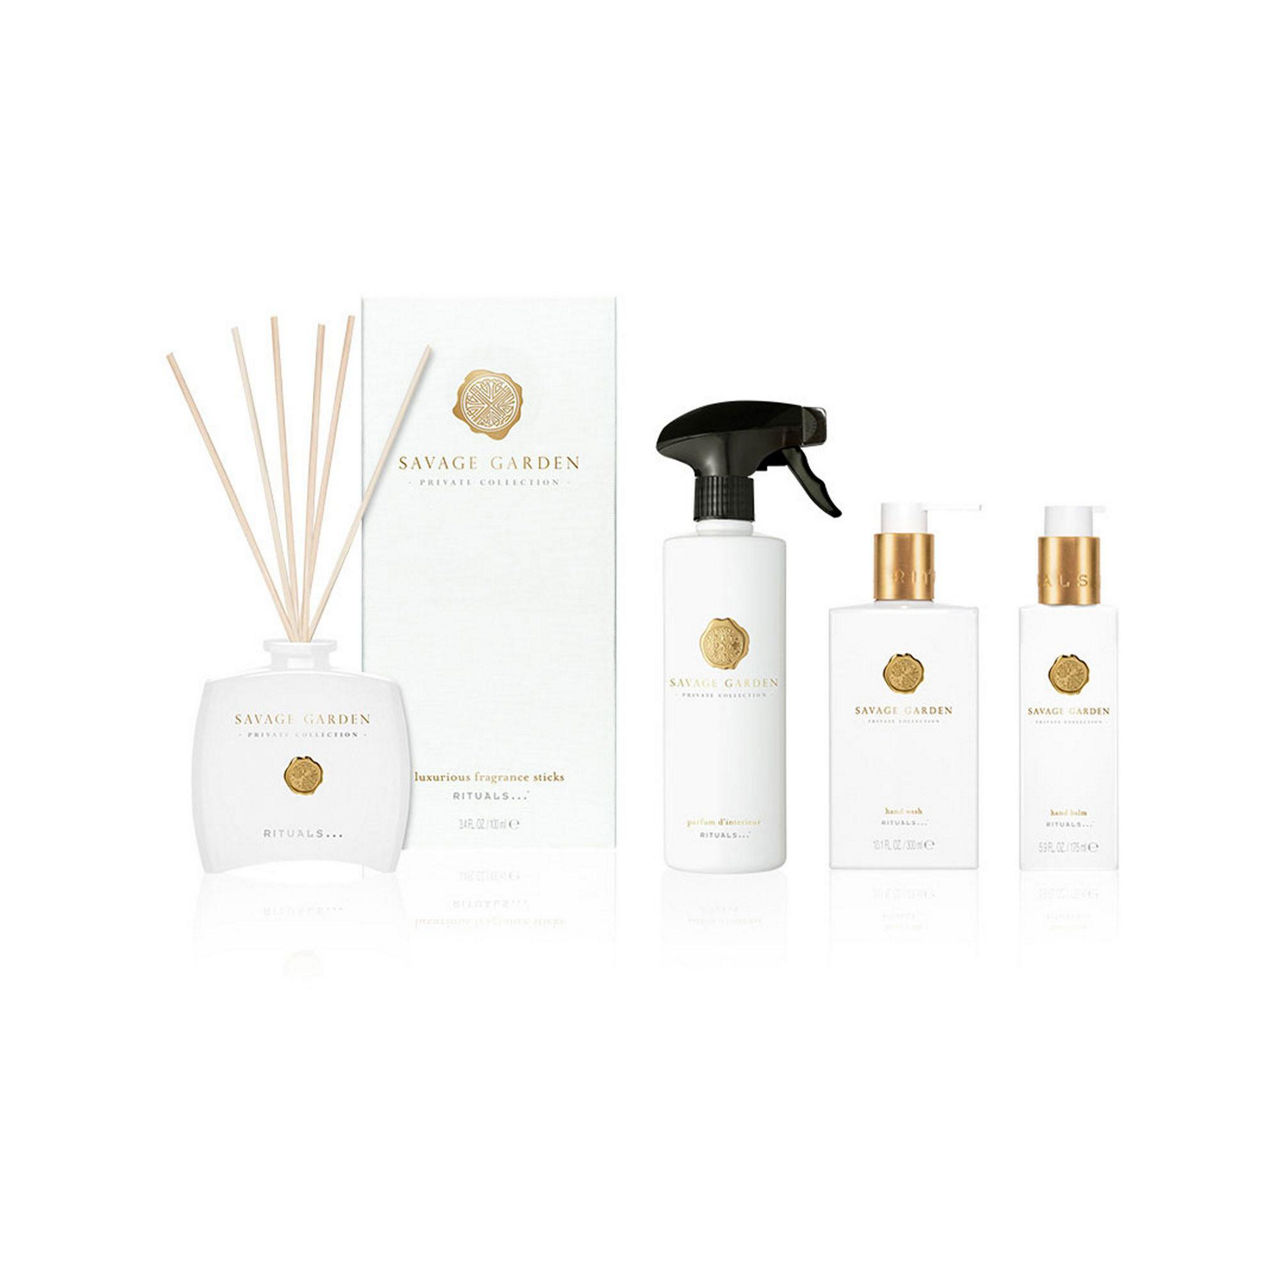 RITUALS Private Collection Set Savage Garden Gift Set 2022